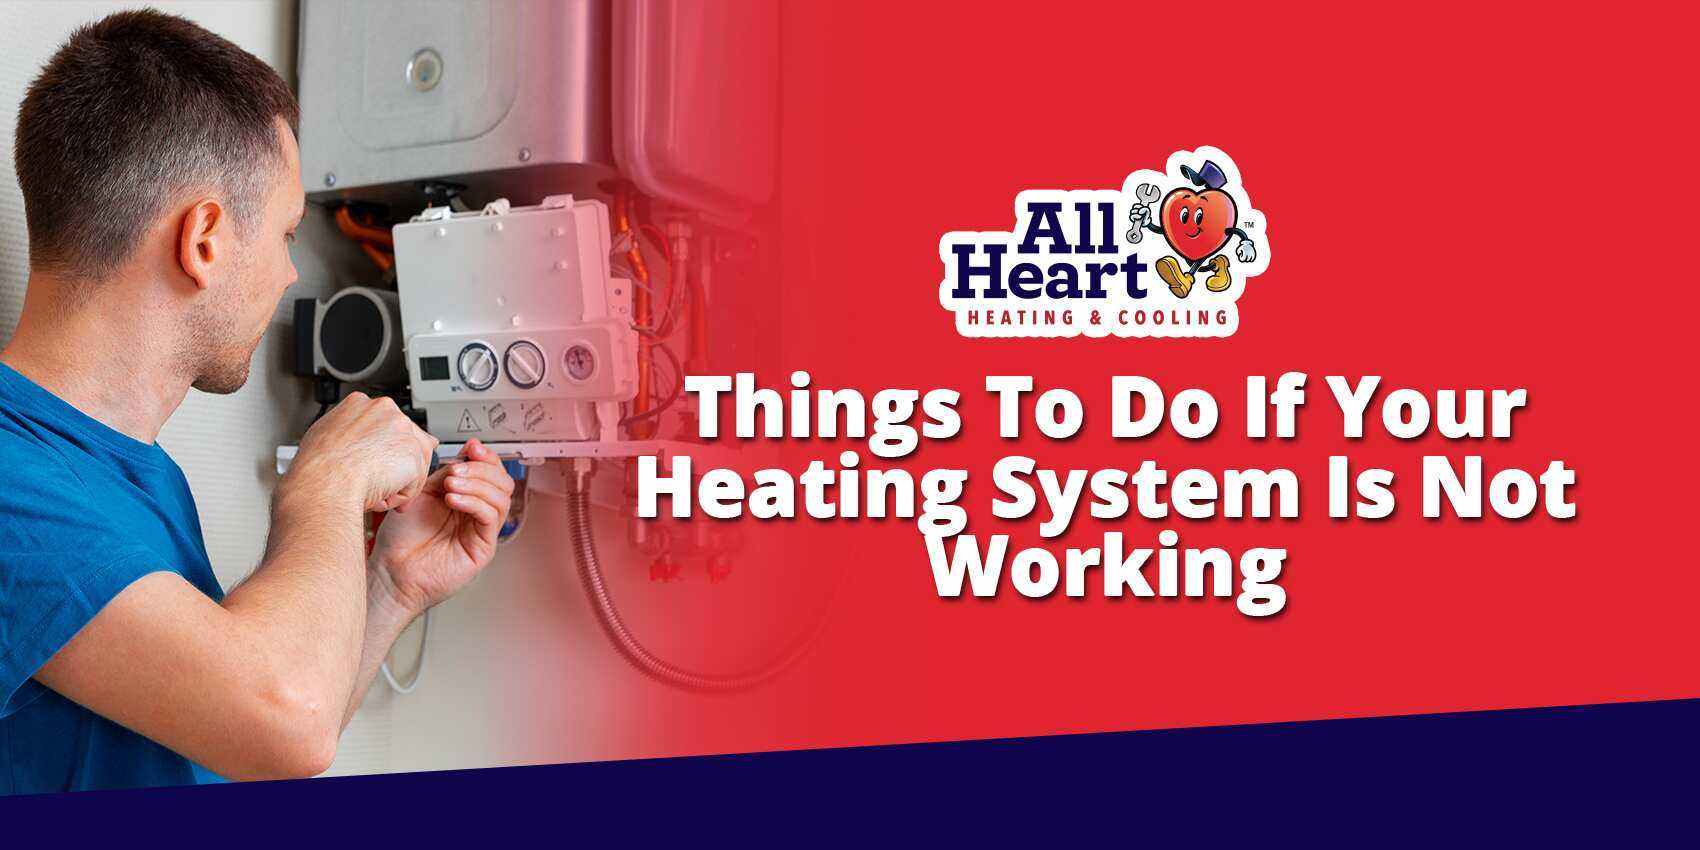 Things to do if your heating system is not working with expert image